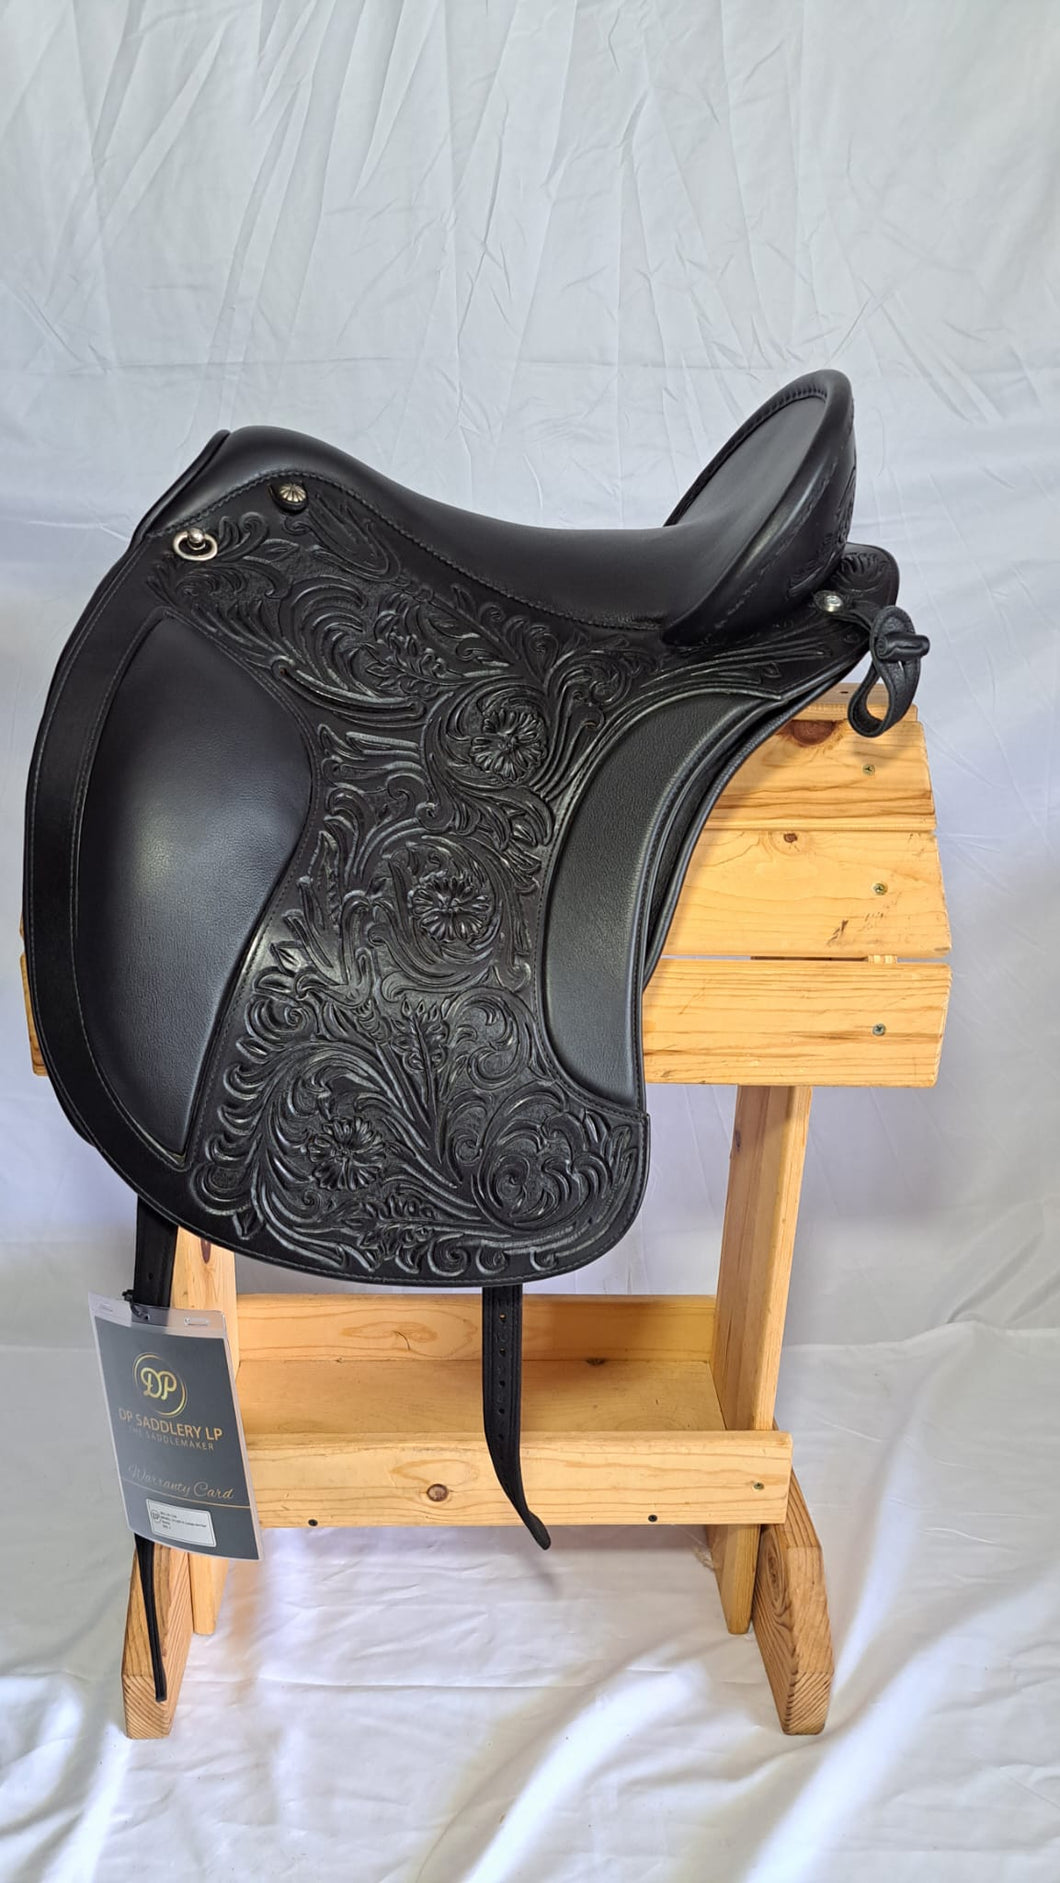 dp saddlery el campo shorty 7141, side view on a wooden saddle rack, white background